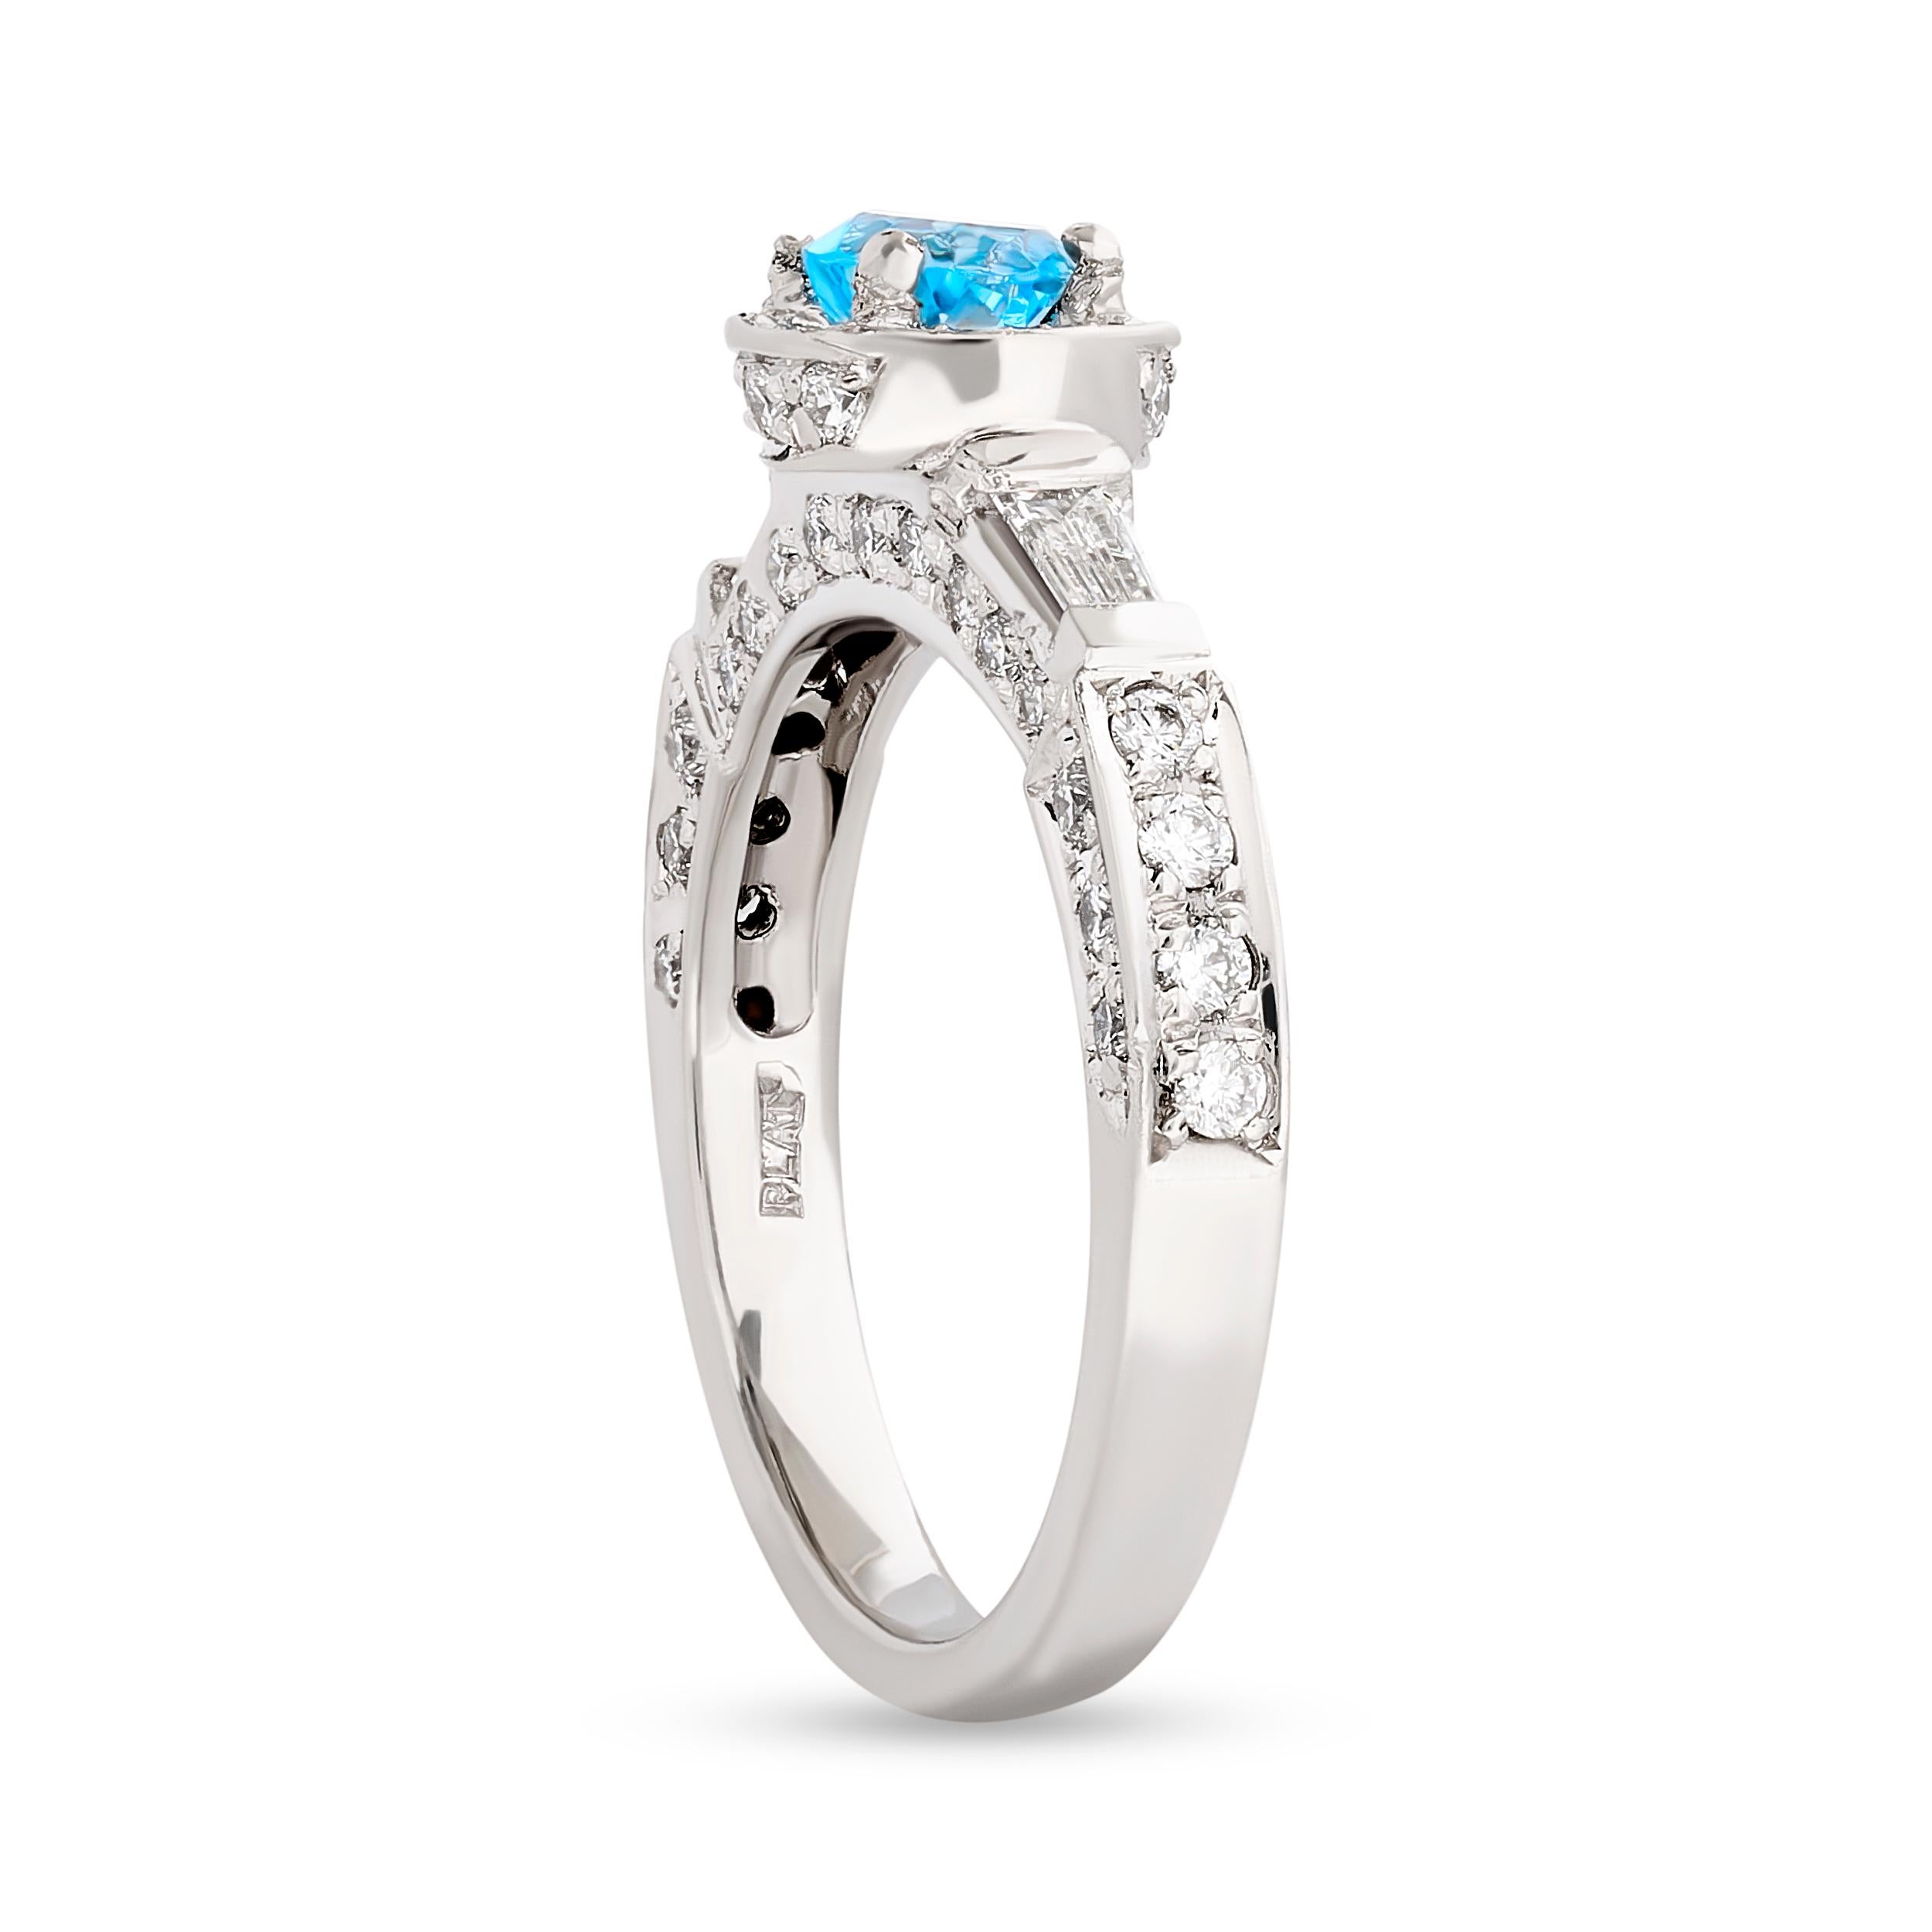 Make a statement with this stunning blue topaz and diamond halo ring from Gregg Ruth.
This Gregg Ruth ring has a bright blue topaz that weighs approximately 0.37 carat. It is surrounded by round diamonds in a halo, that weigh approximately 0.65